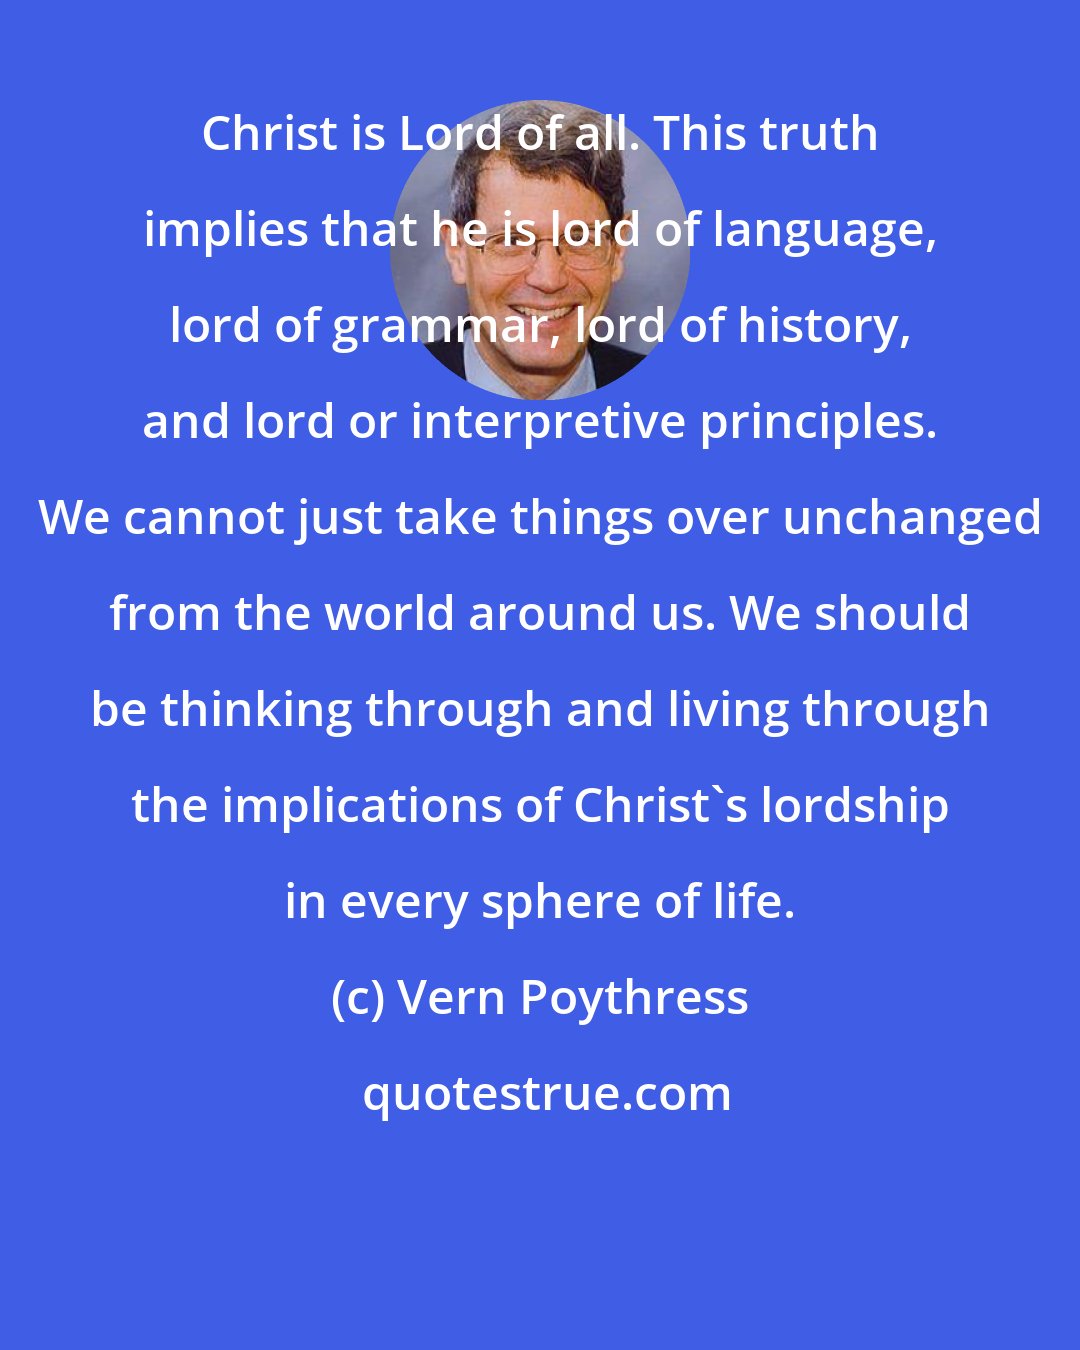 Vern Poythress: Christ is Lord of all. This truth implies that he is lord of language, lord of grammar, lord of history, and lord or interpretive principles. We cannot just take things over unchanged from the world around us. We should be thinking through and living through the implications of Christ's lordship in every sphere of life.